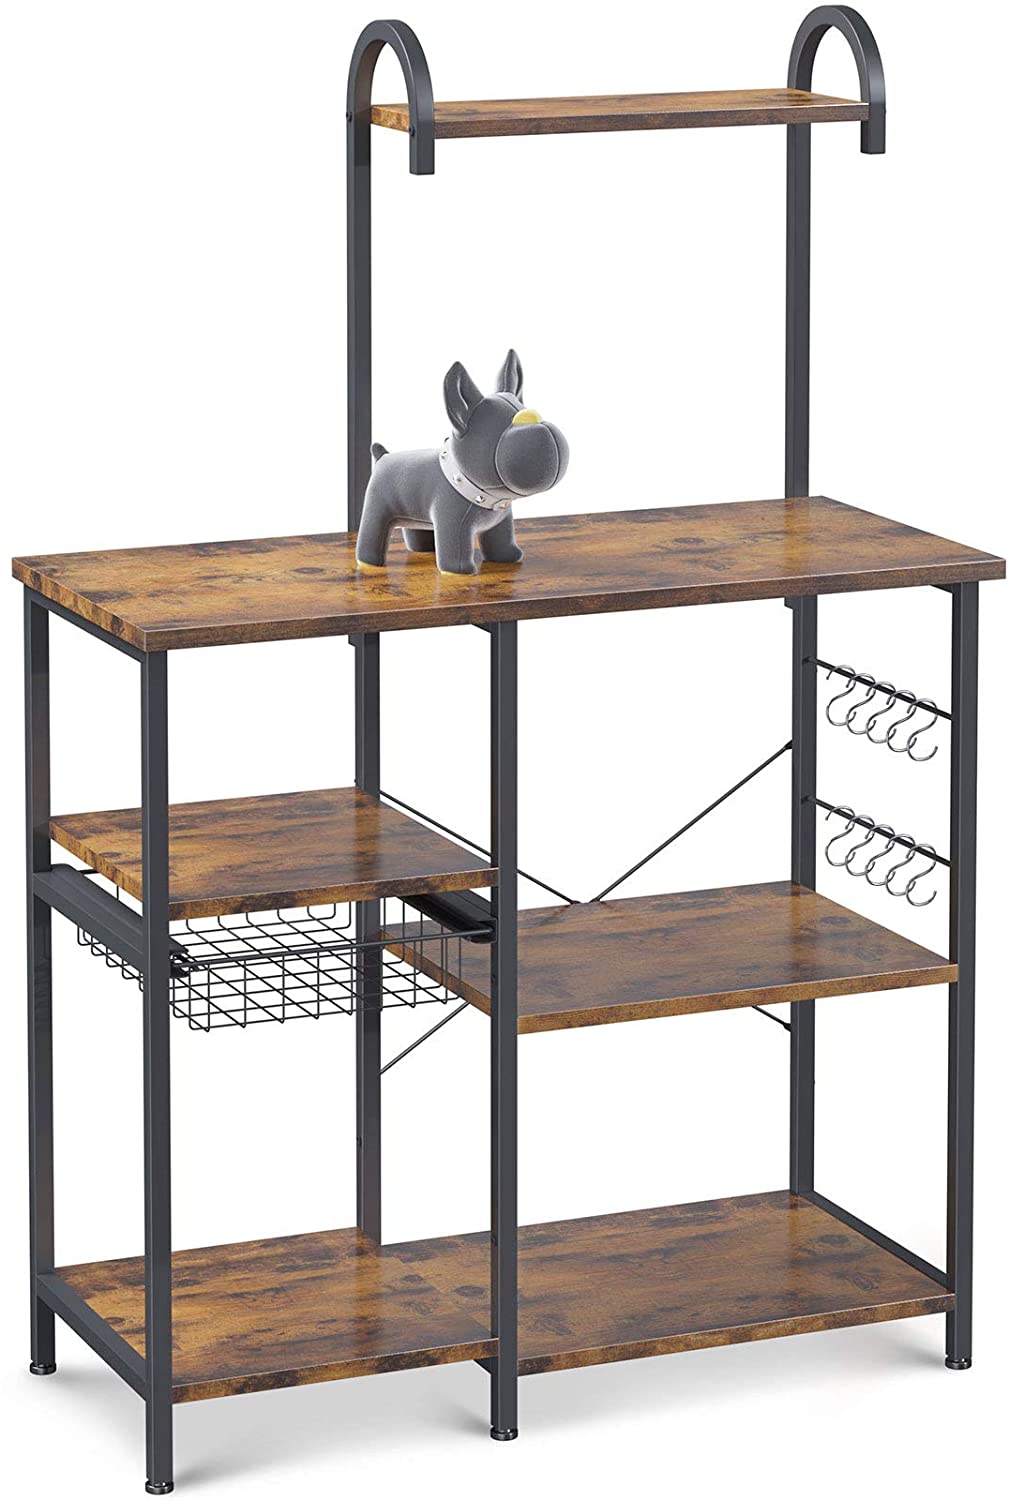 3-Tier+4-Tier Kitchen Bakers Rack, Microwave Oven Stand, Coffee Bar Table, Rustic Brown for $75.64/Beige White for 76.49 + Free Shipping with PRIME